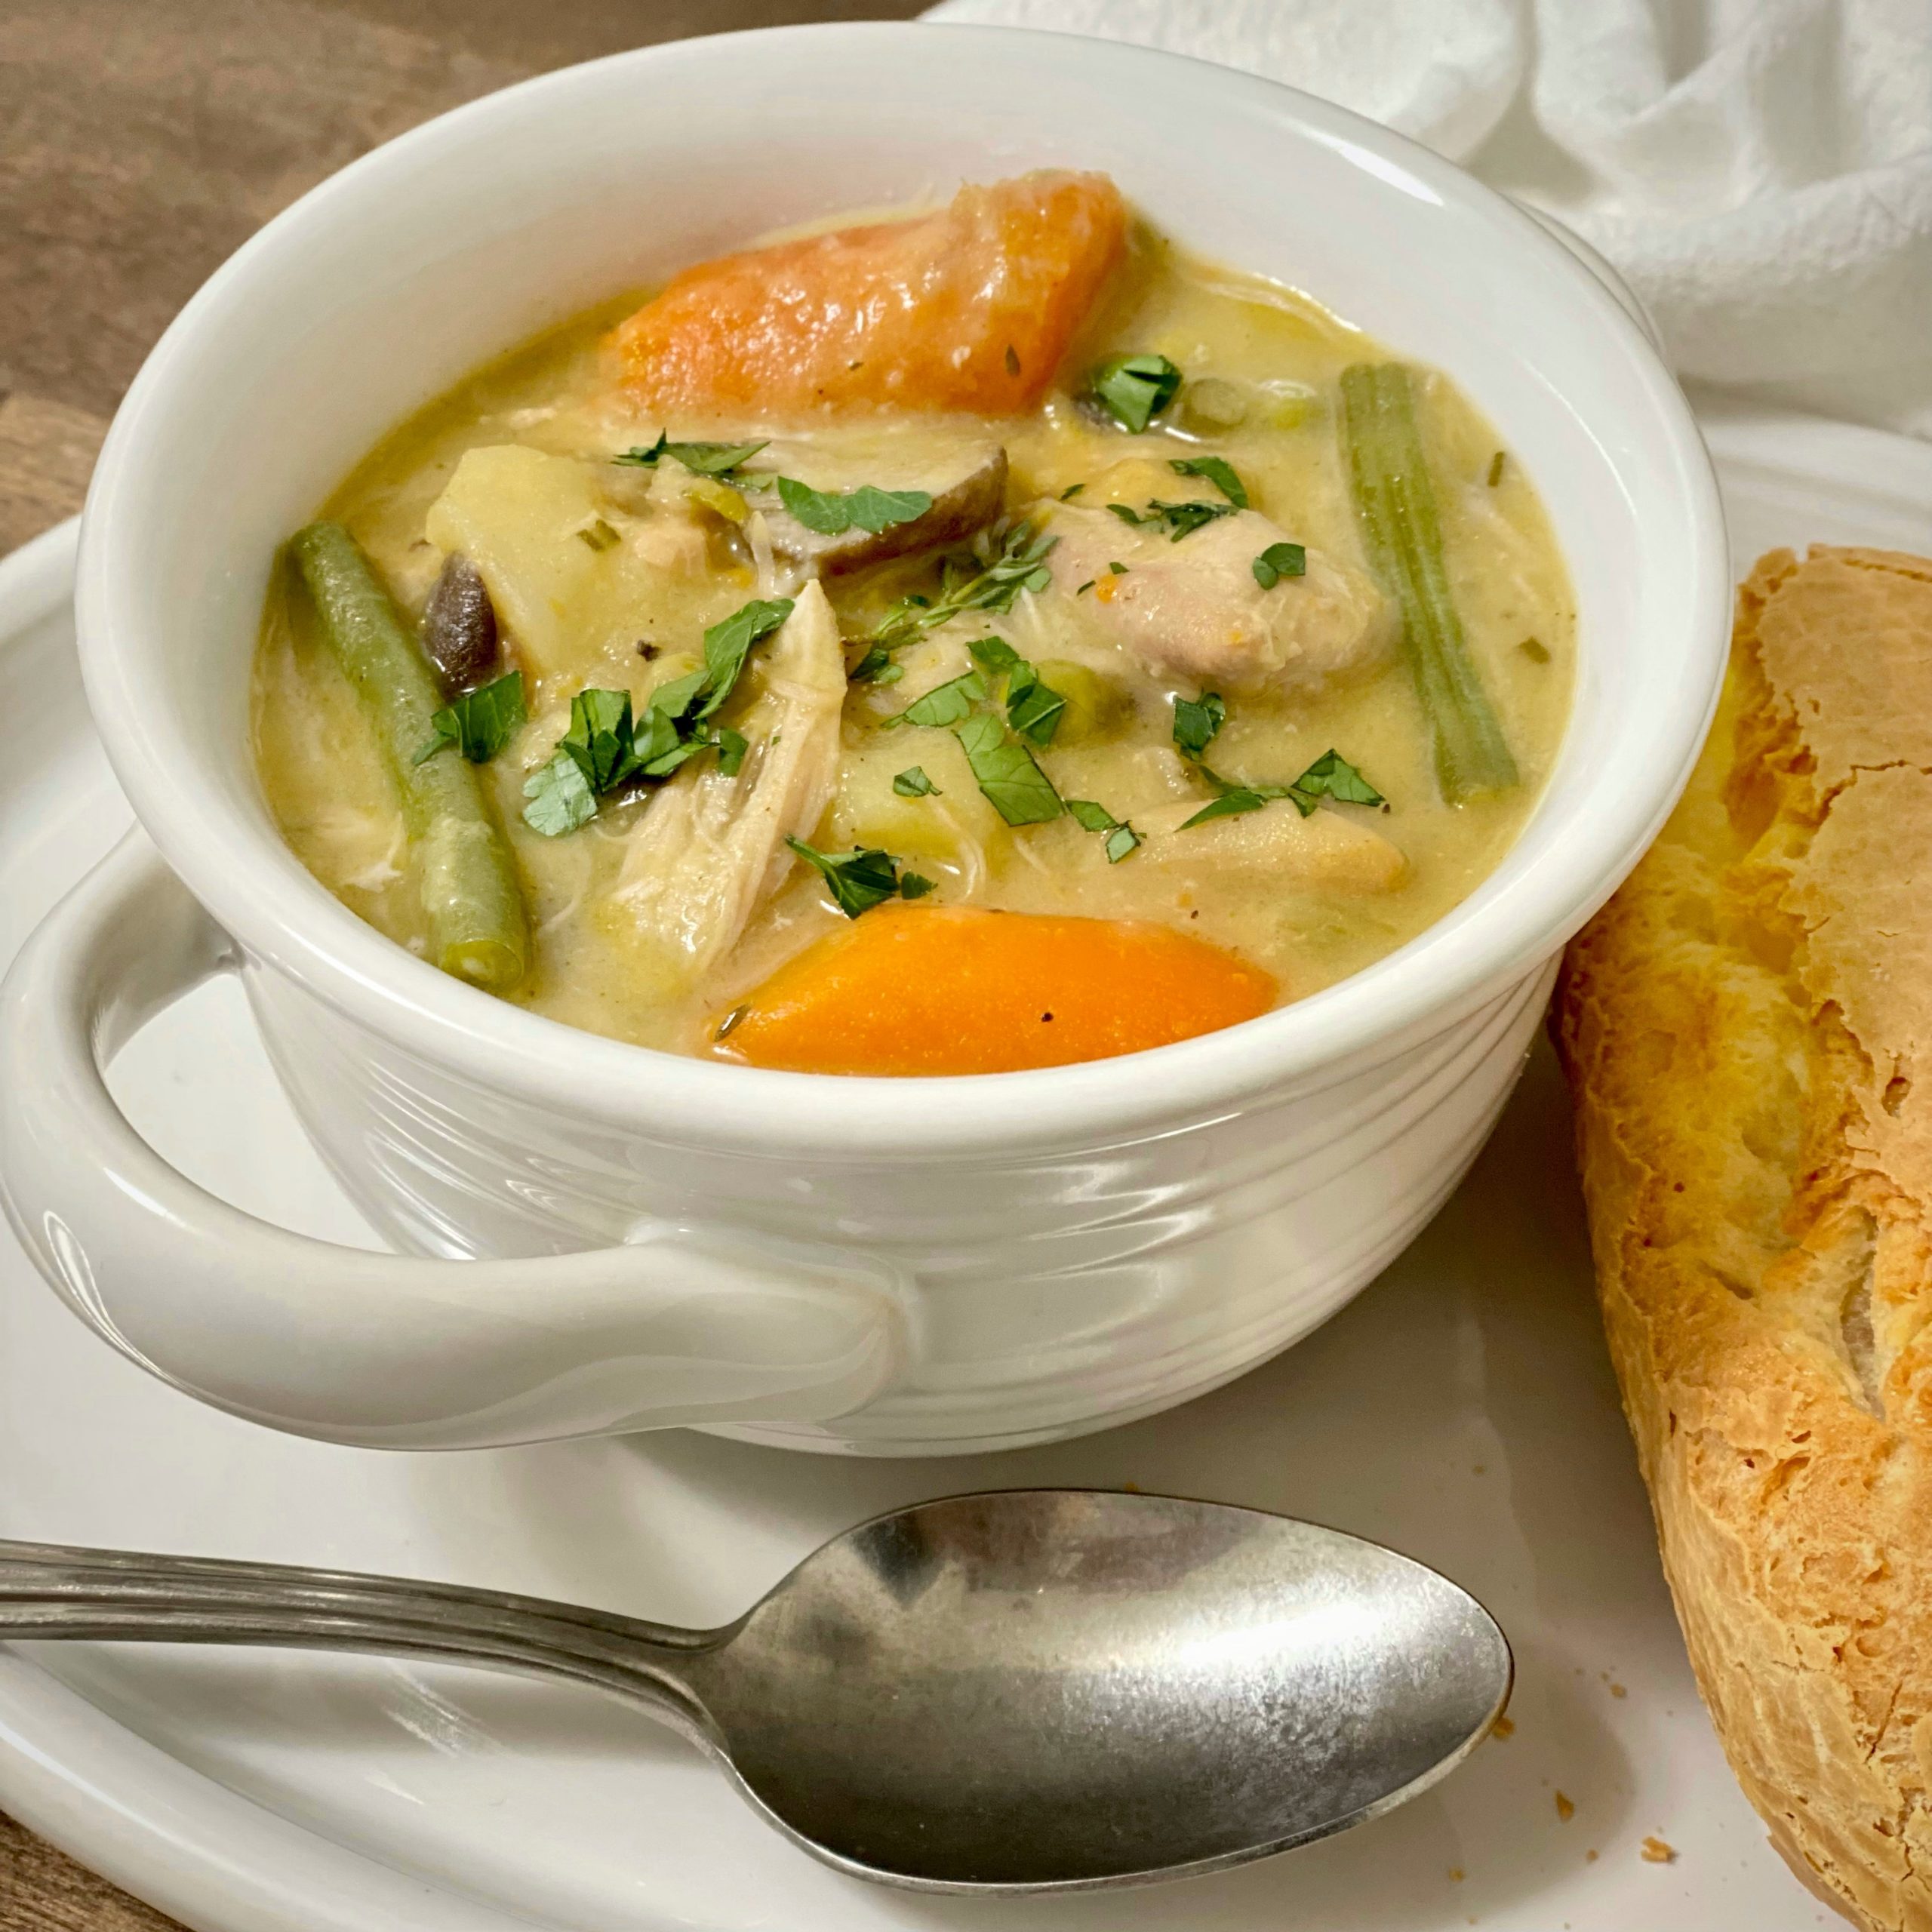 Savory chicken stew in a bowl with a spoon and baguette next to it.